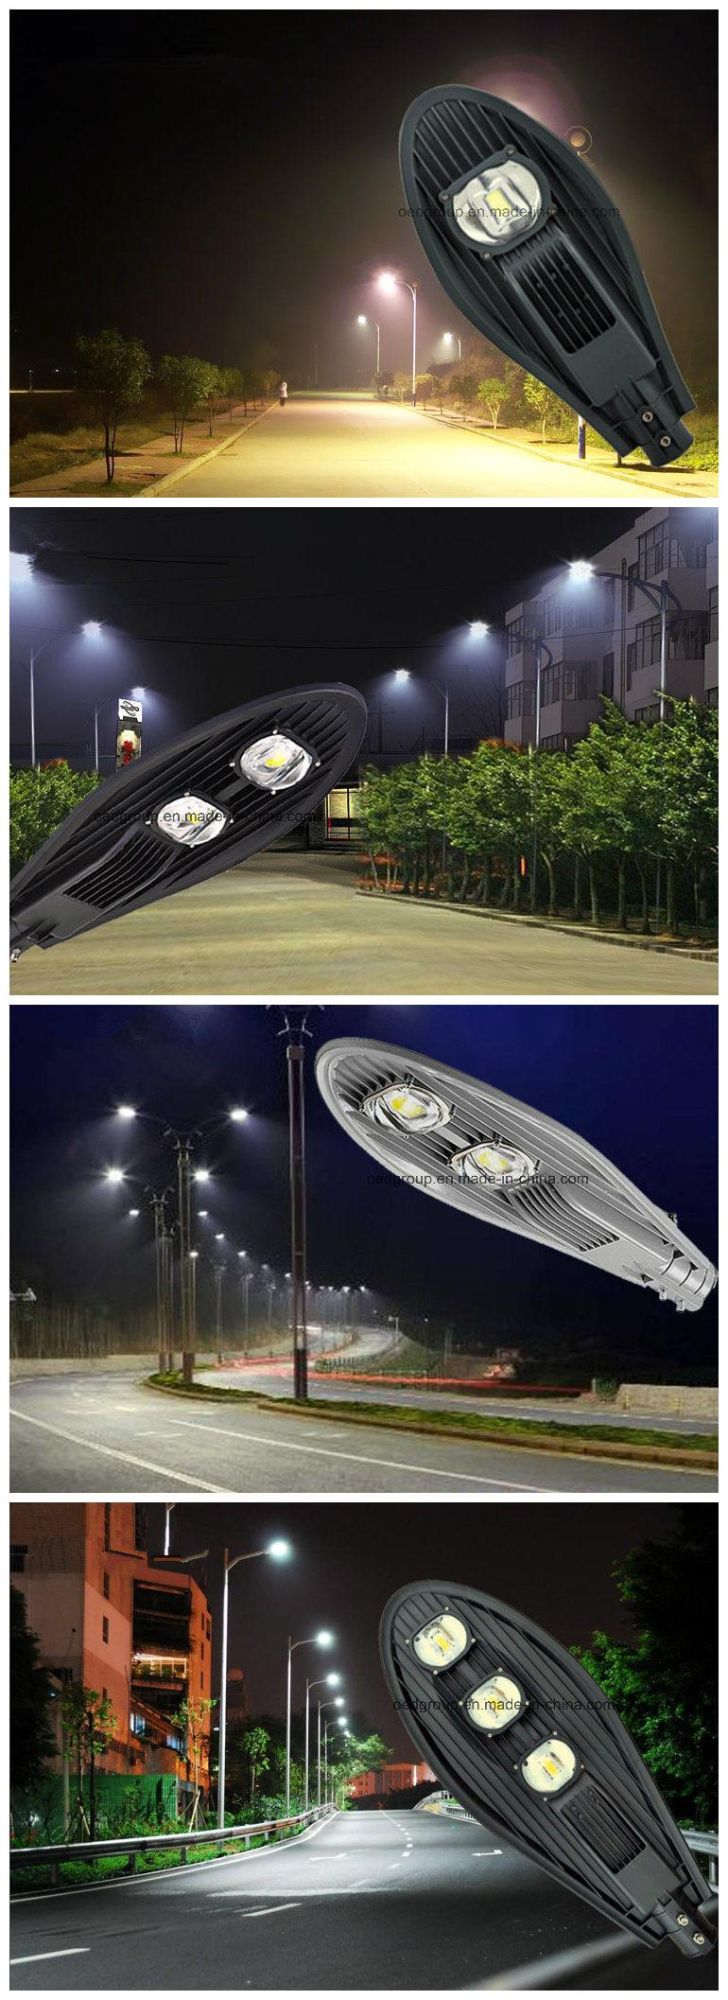 IP65 with Magnifying Lens COB LED Isolated Driver 3 Years Warranty 80W Roadway LED Lighting